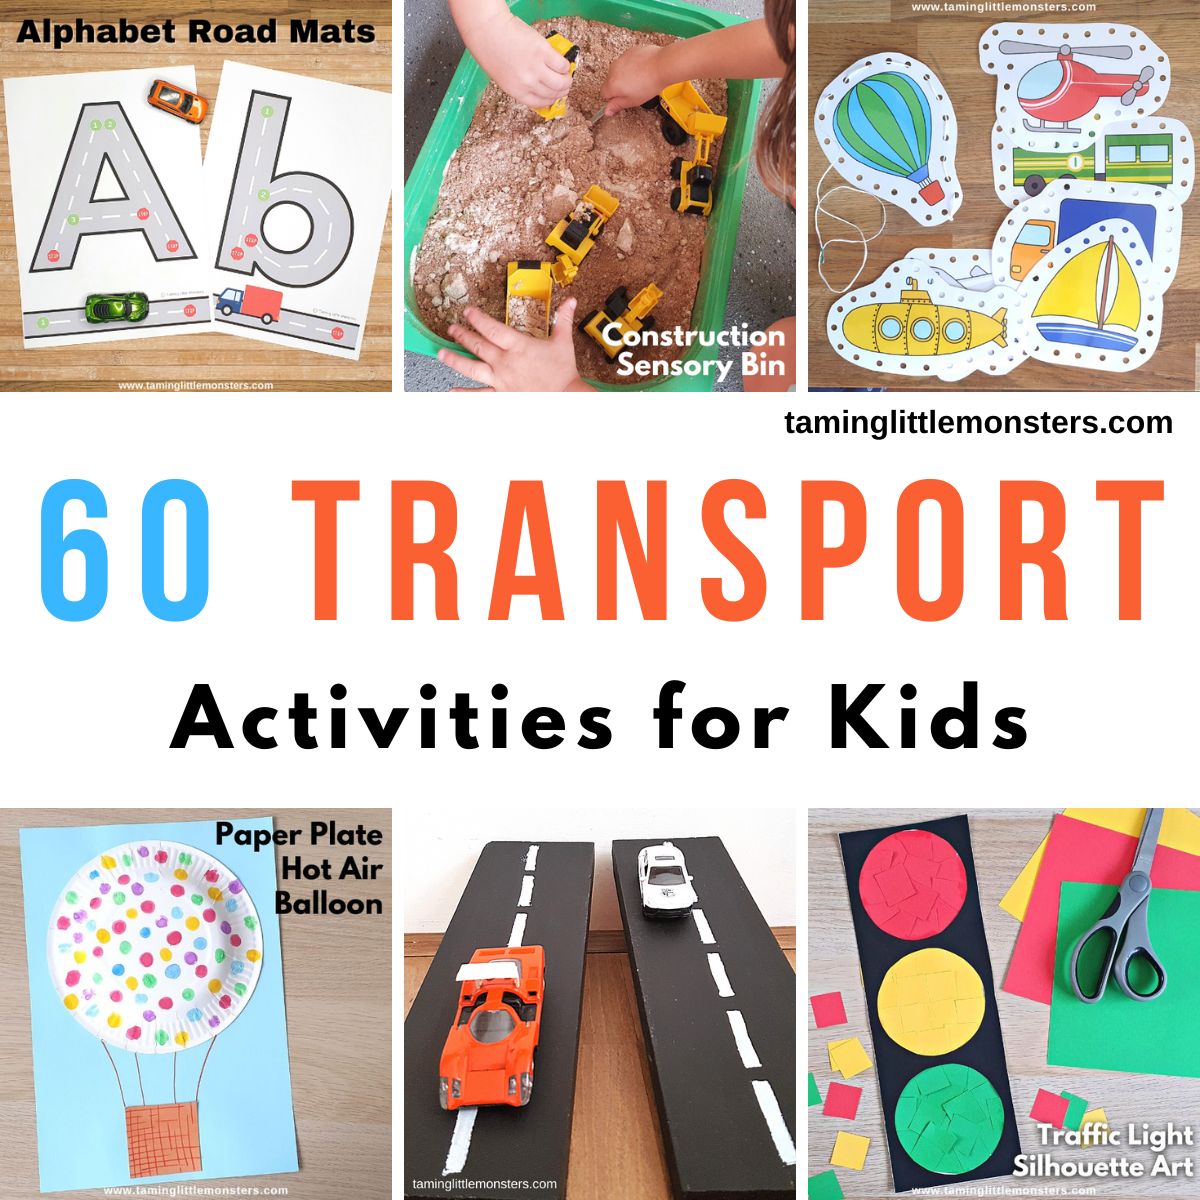 Cars Theme Toddler Activities | Preschool Curriculum & Lesson Plans 2-3  Year Old